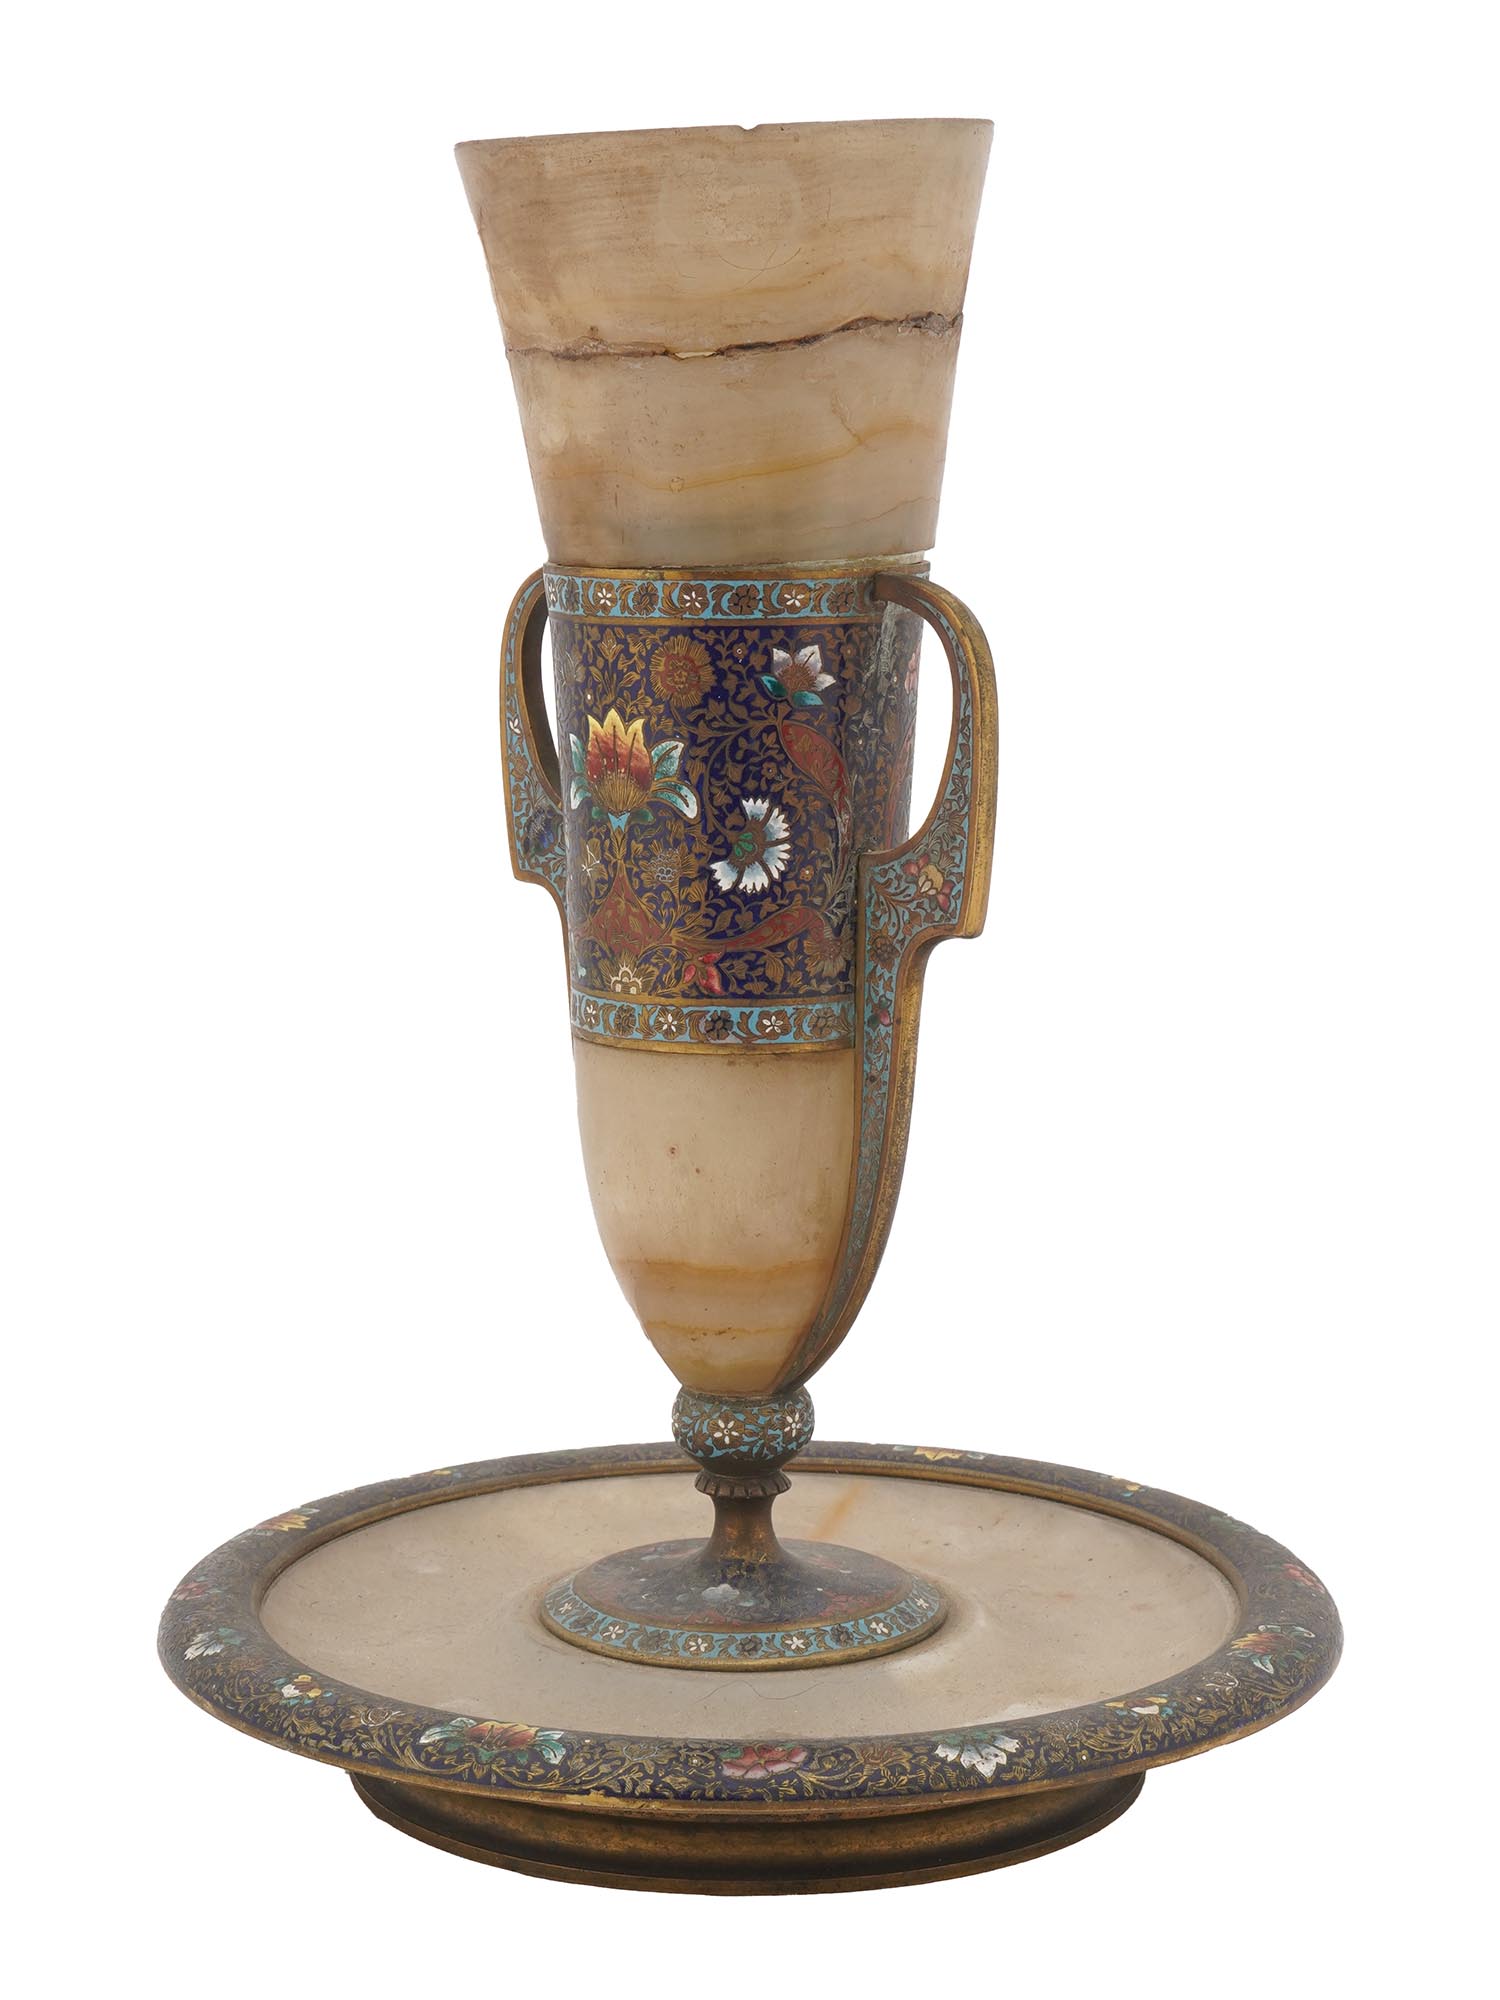 FRENCH CLOISONNE ENAMEL ONYX KIDDUSH CUP W STAND PIC-4